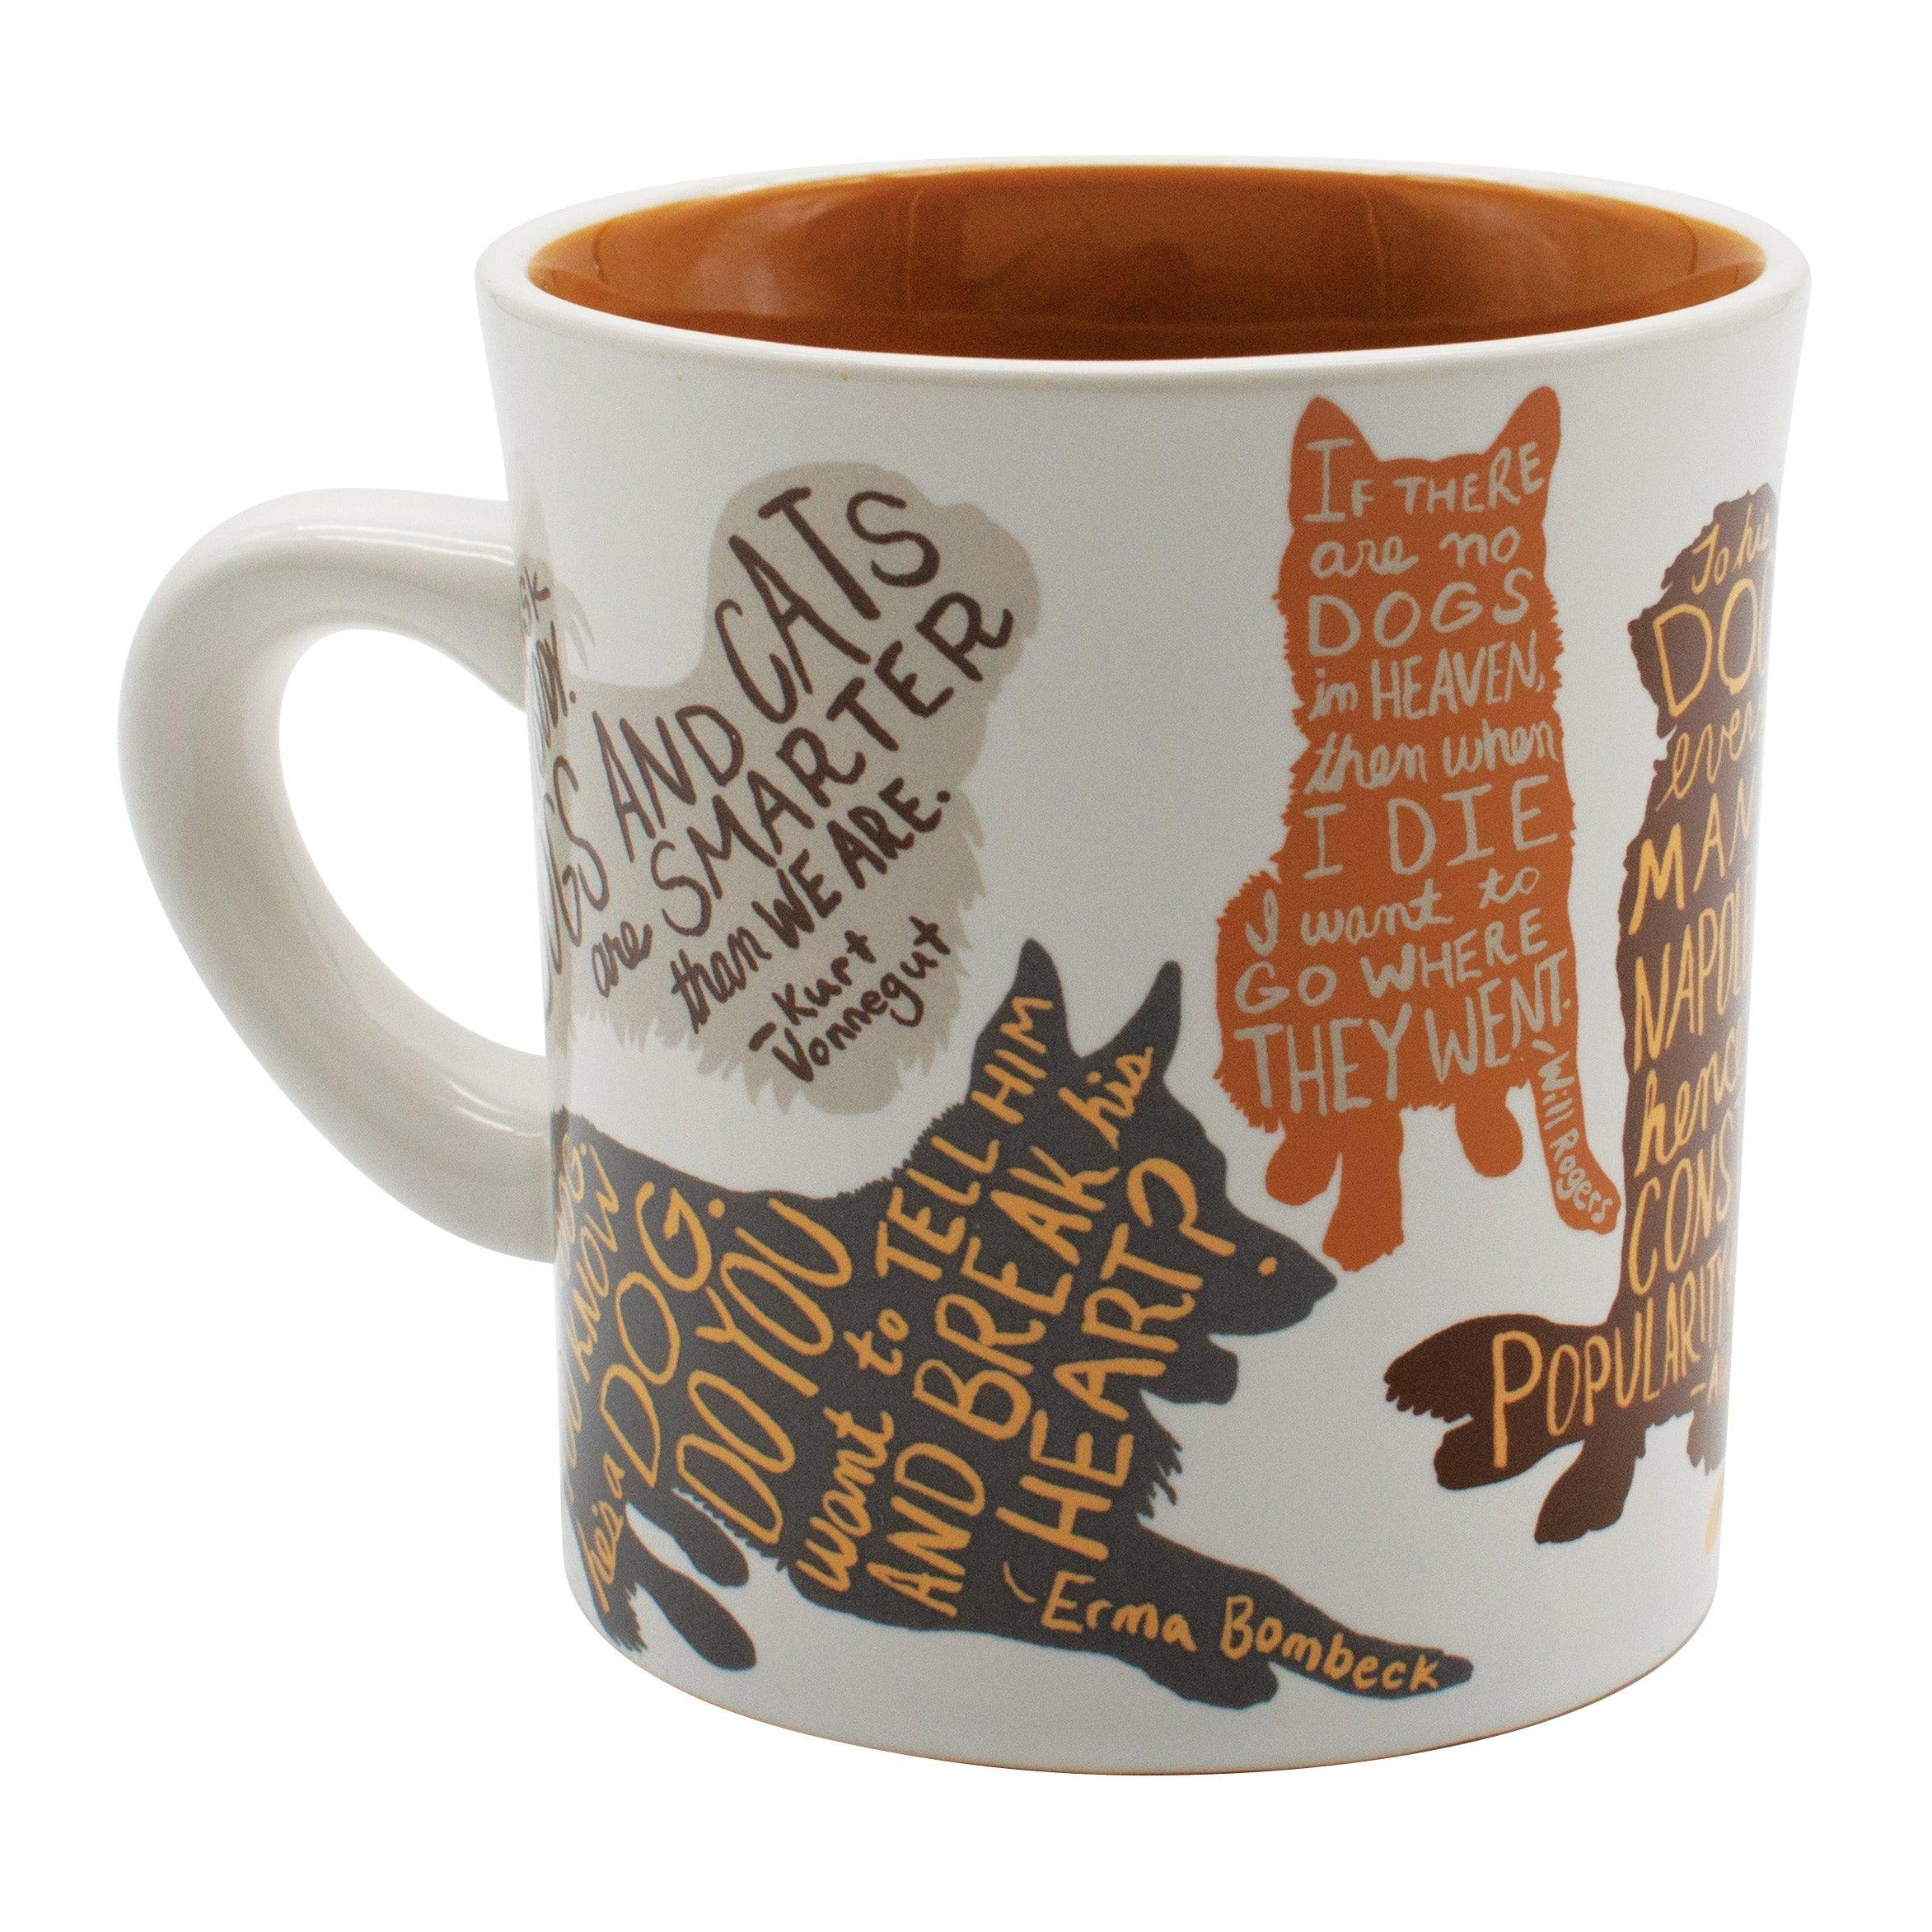 Product photo of Literary Dog Mug, a novelty gift manufactured by The Unemployed Philosophers Guild.